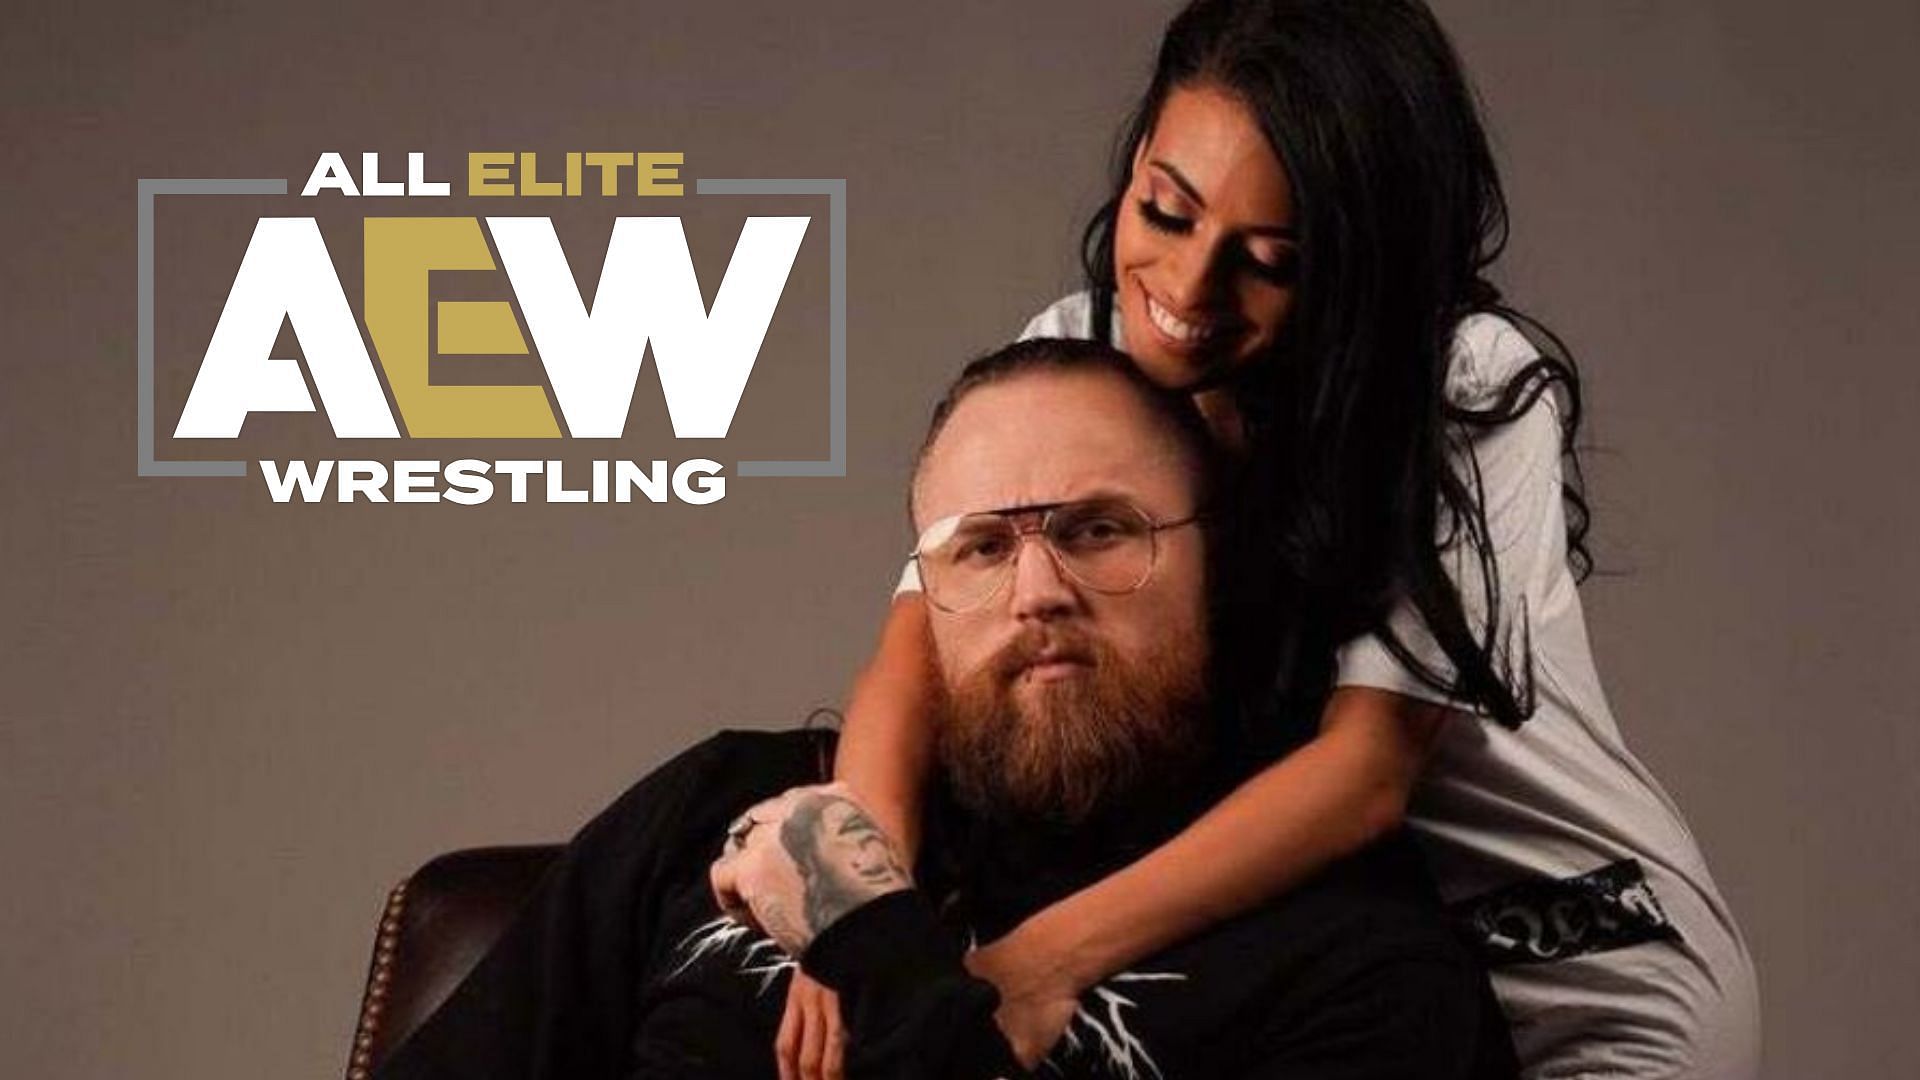 Malakai Black and Zelina Vega are going to help the next generation of wrestlers